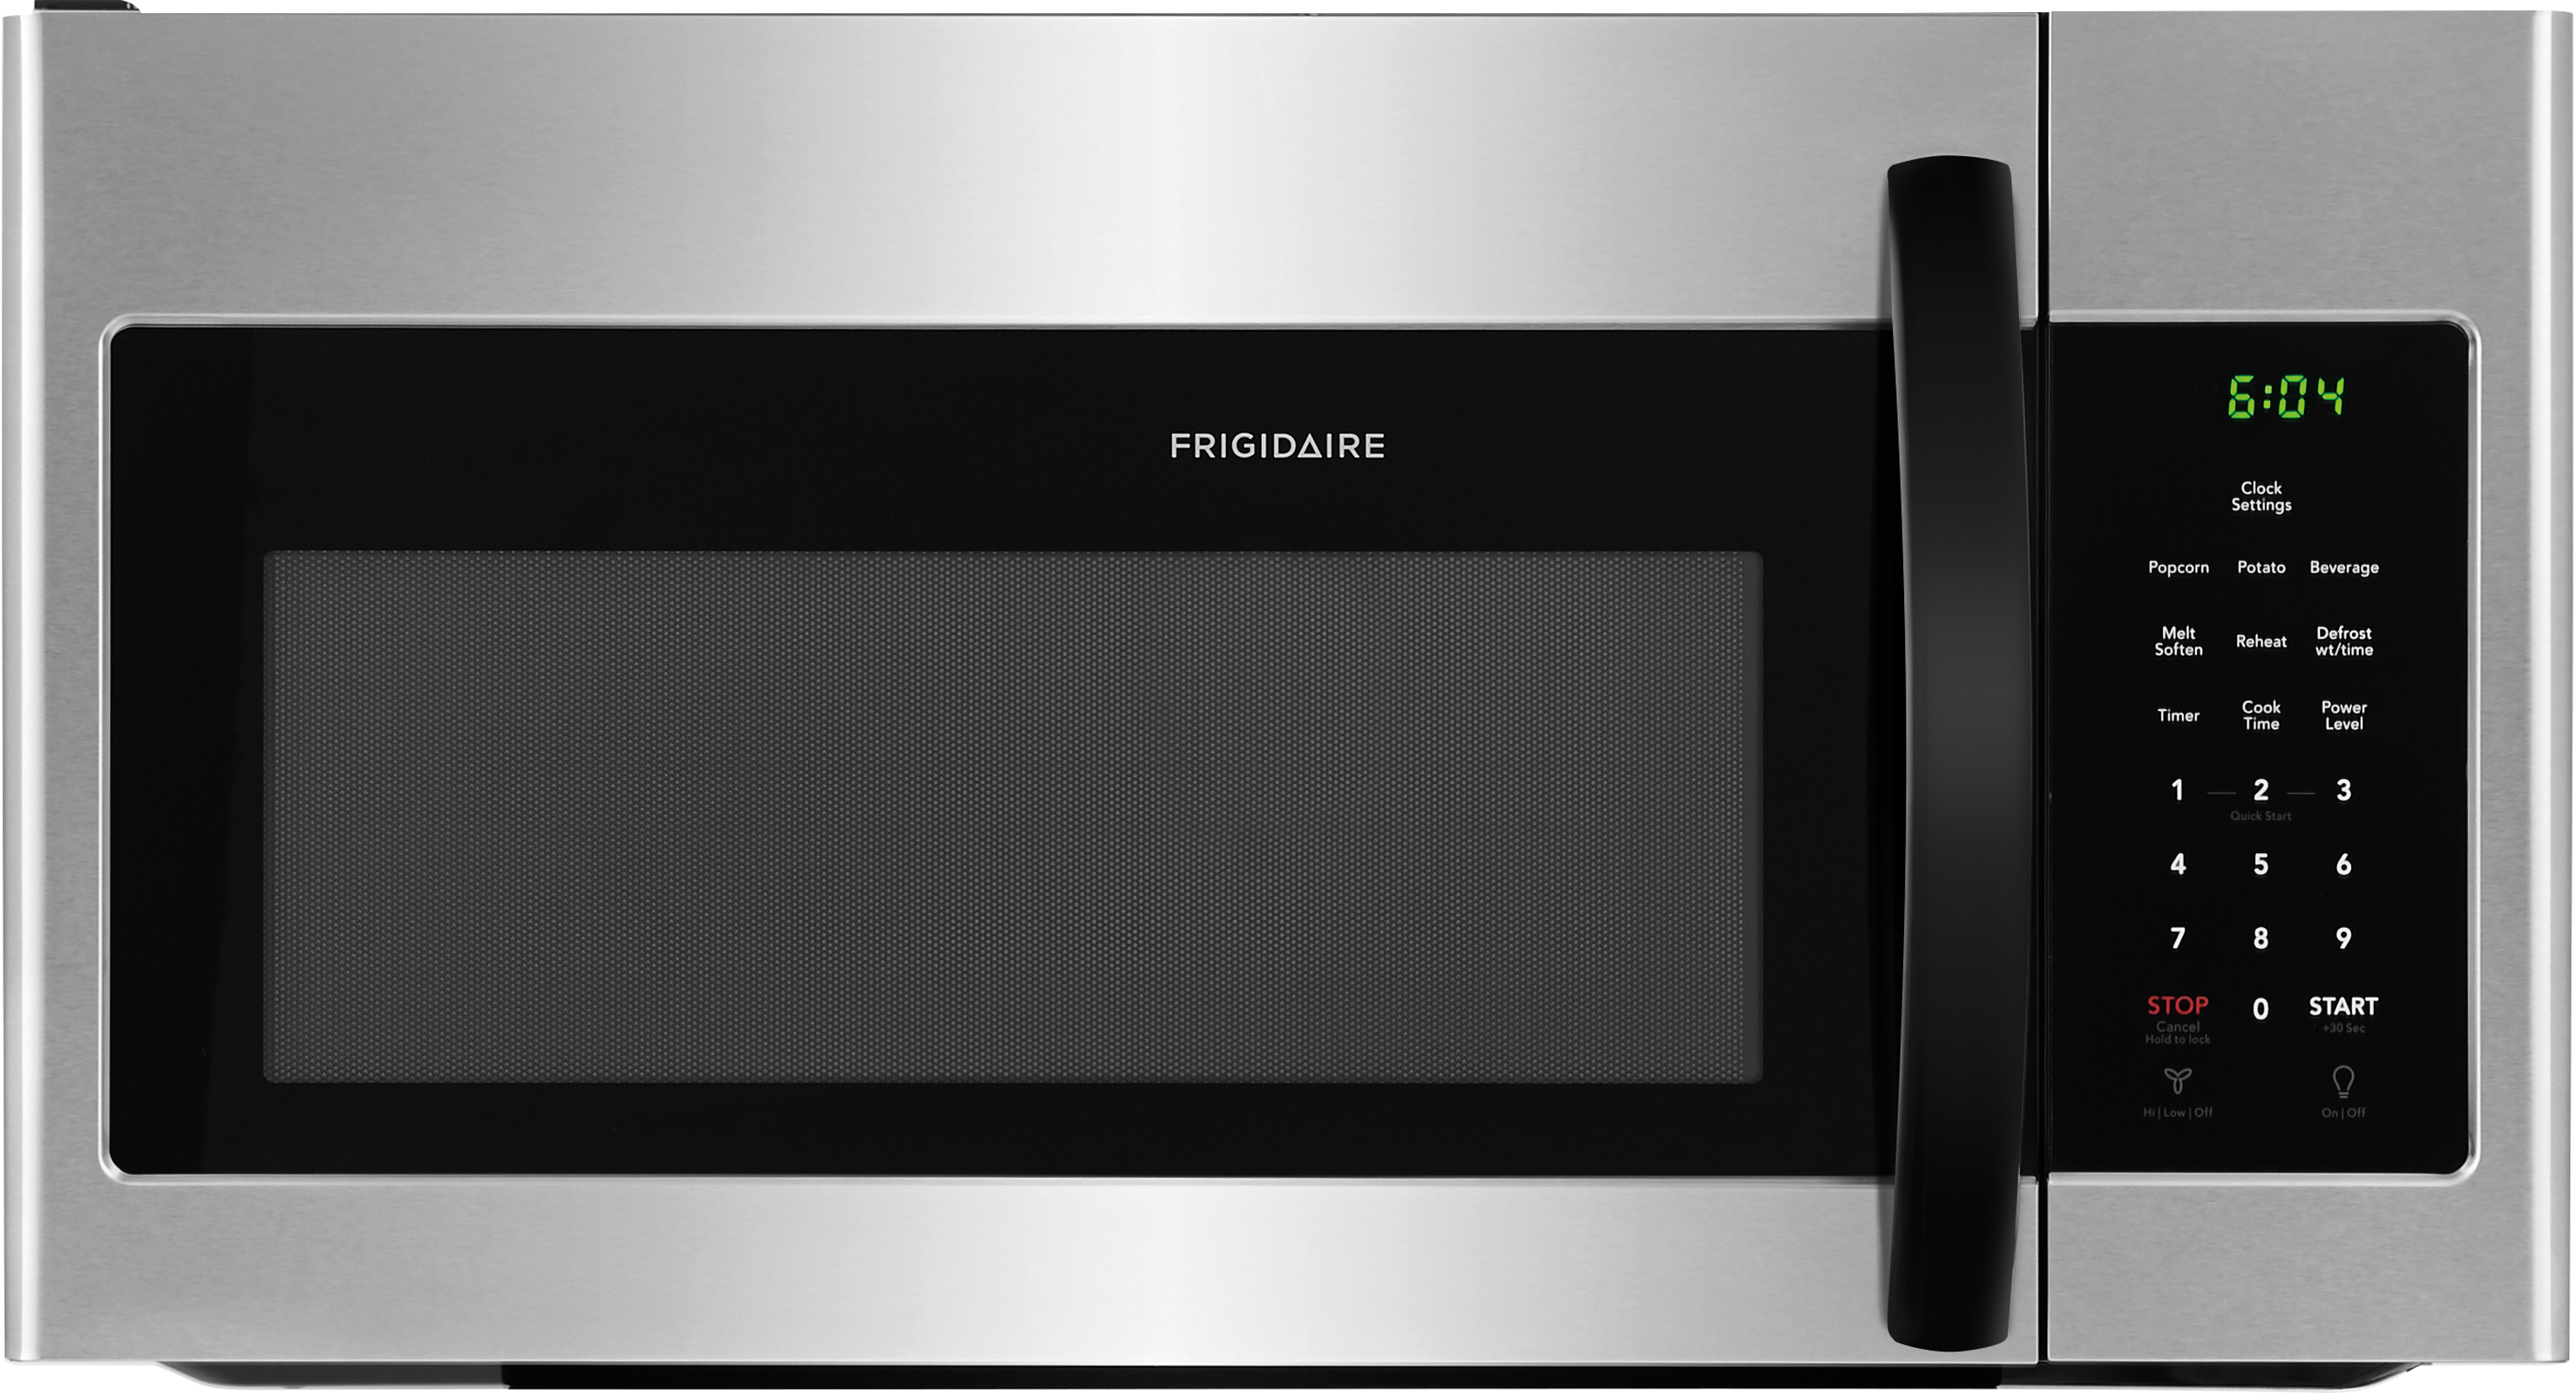 Frigidaire FFMV1645TH 30" Over-The-Range Microwave - Stainless Steel w